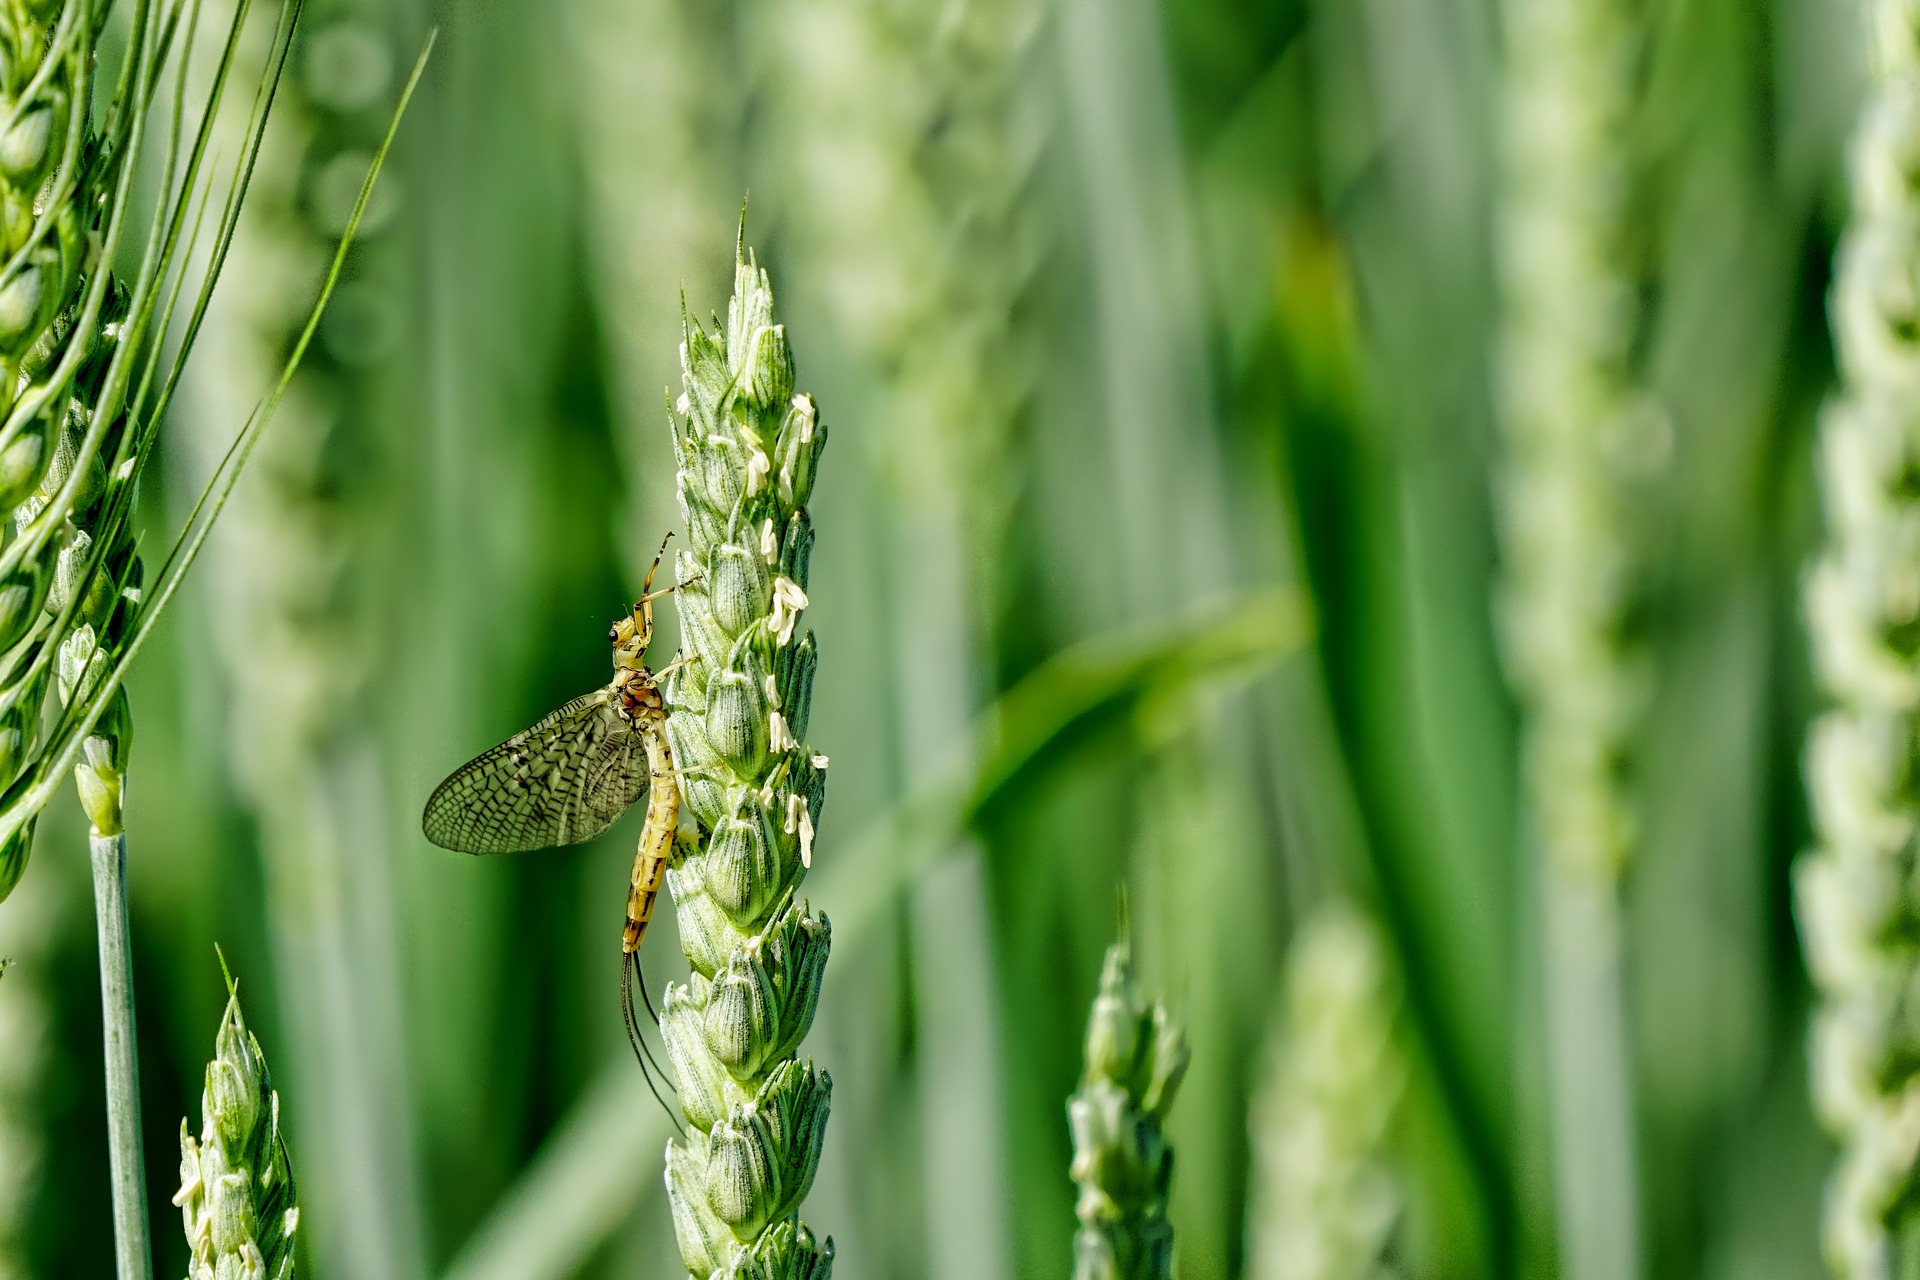 A mayfly rests on a plant.